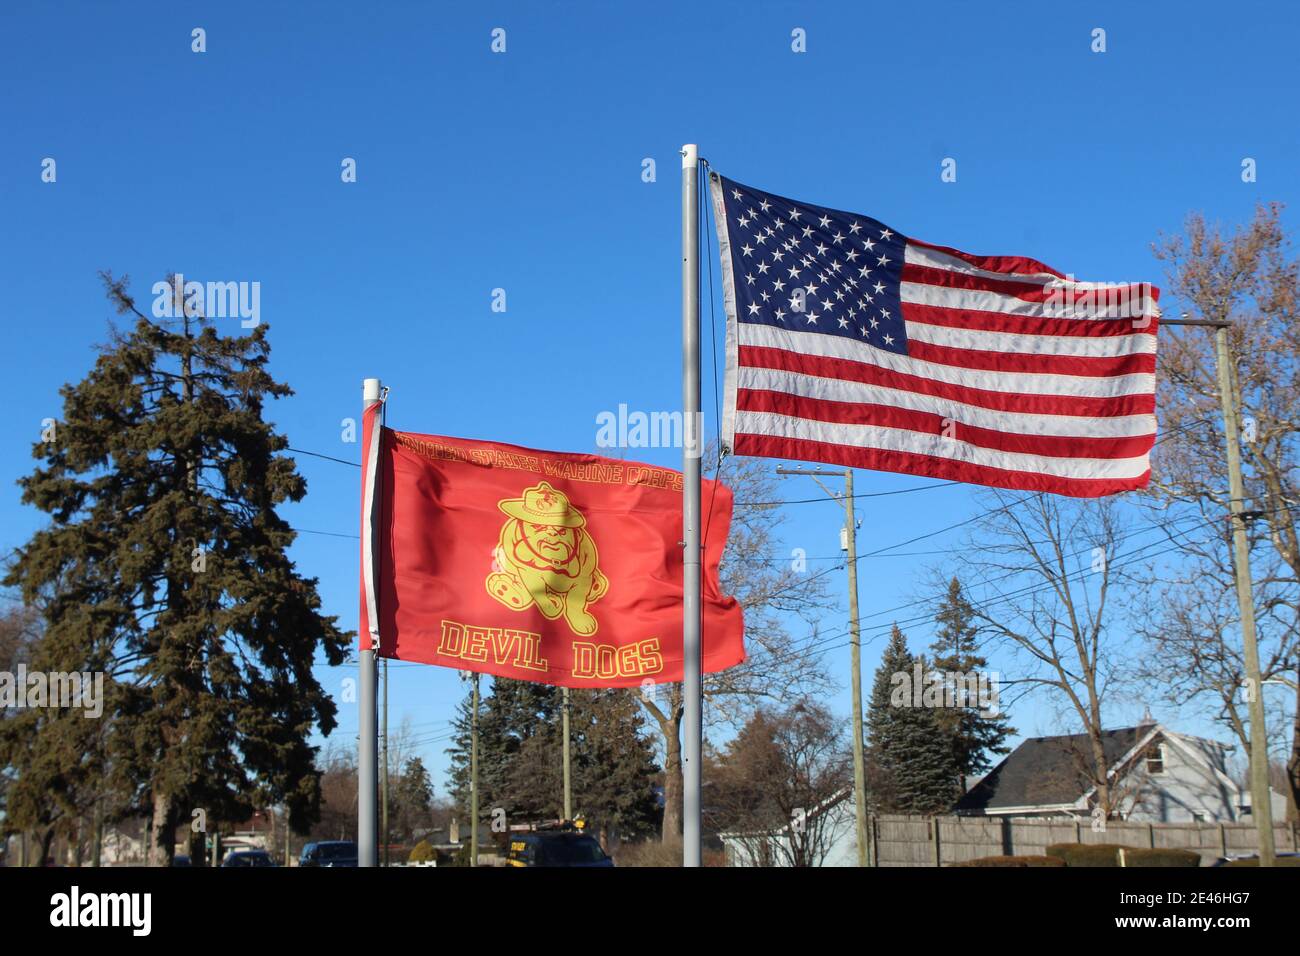 United States Marine Corps Devil Dogs flag with US flag flying next to it Stock Photo